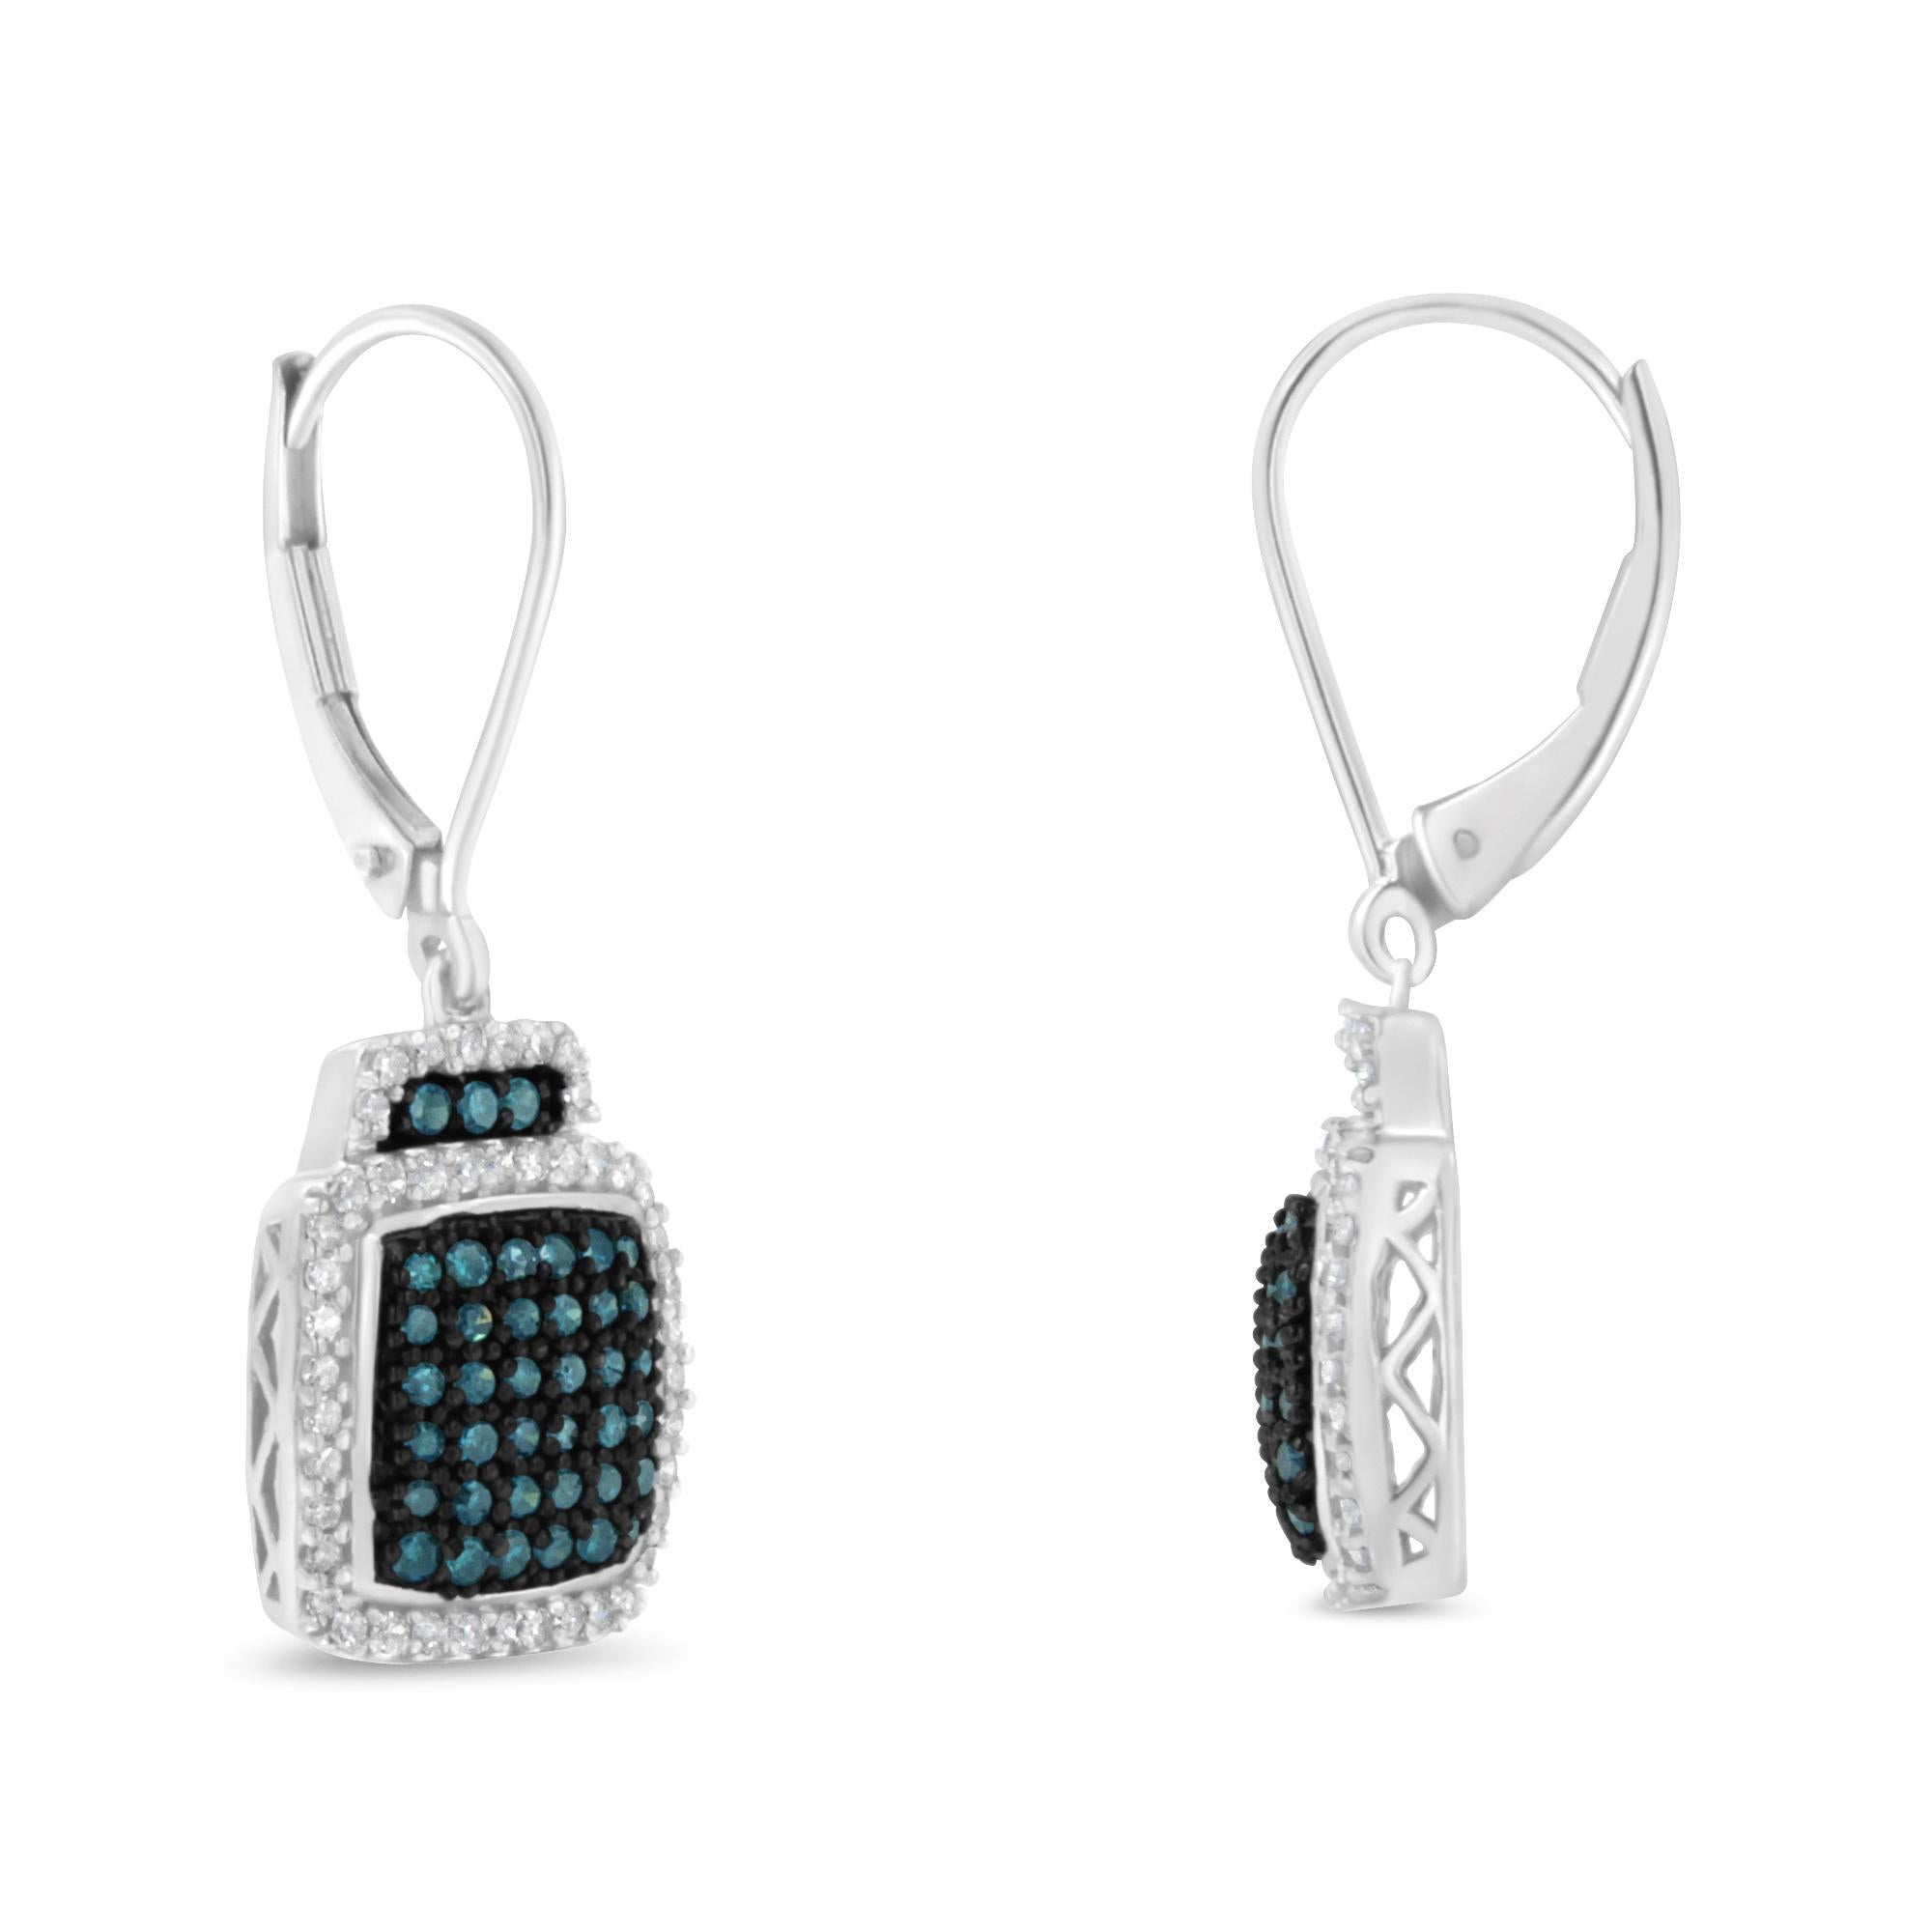 A pair of diamond and sterling silver square dangle earrings. Each earring features a central design of treated blue diamonds surrounded by a halo of white diamonds. The total diamond weight is .75 carats. The are finished with a leverback closure.